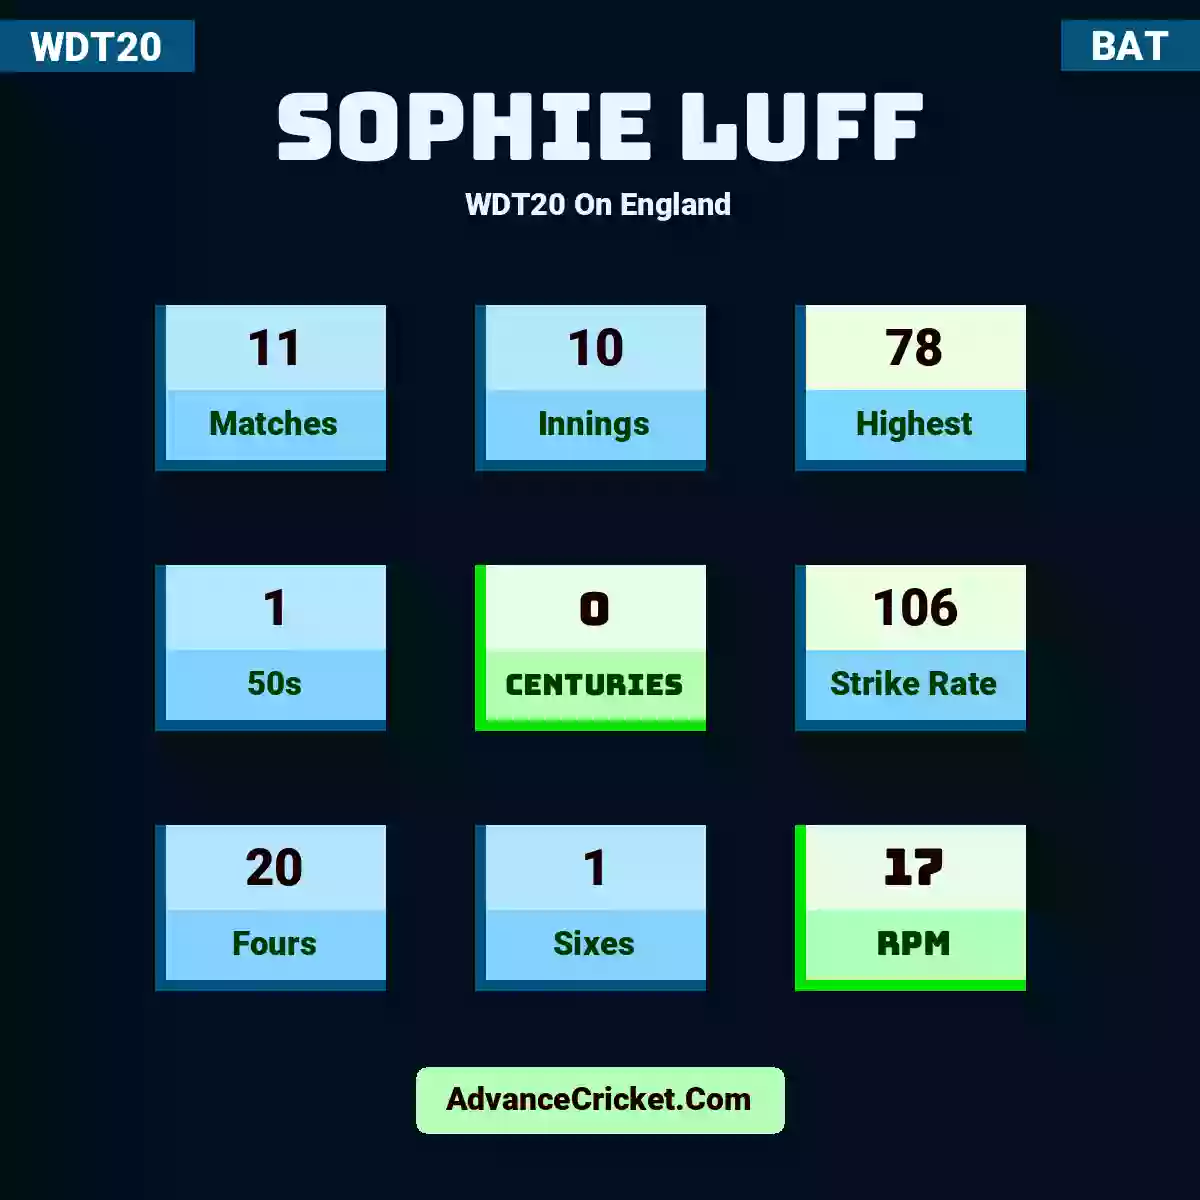 Sophie Luff WDT20  On England, Sophie Luff played 11 matches, scored 78 runs as highest, 1 half-centuries, and 0 centuries, with a strike rate of 106. S.Luff hit 20 fours and 1 sixes, with an RPM of 17.